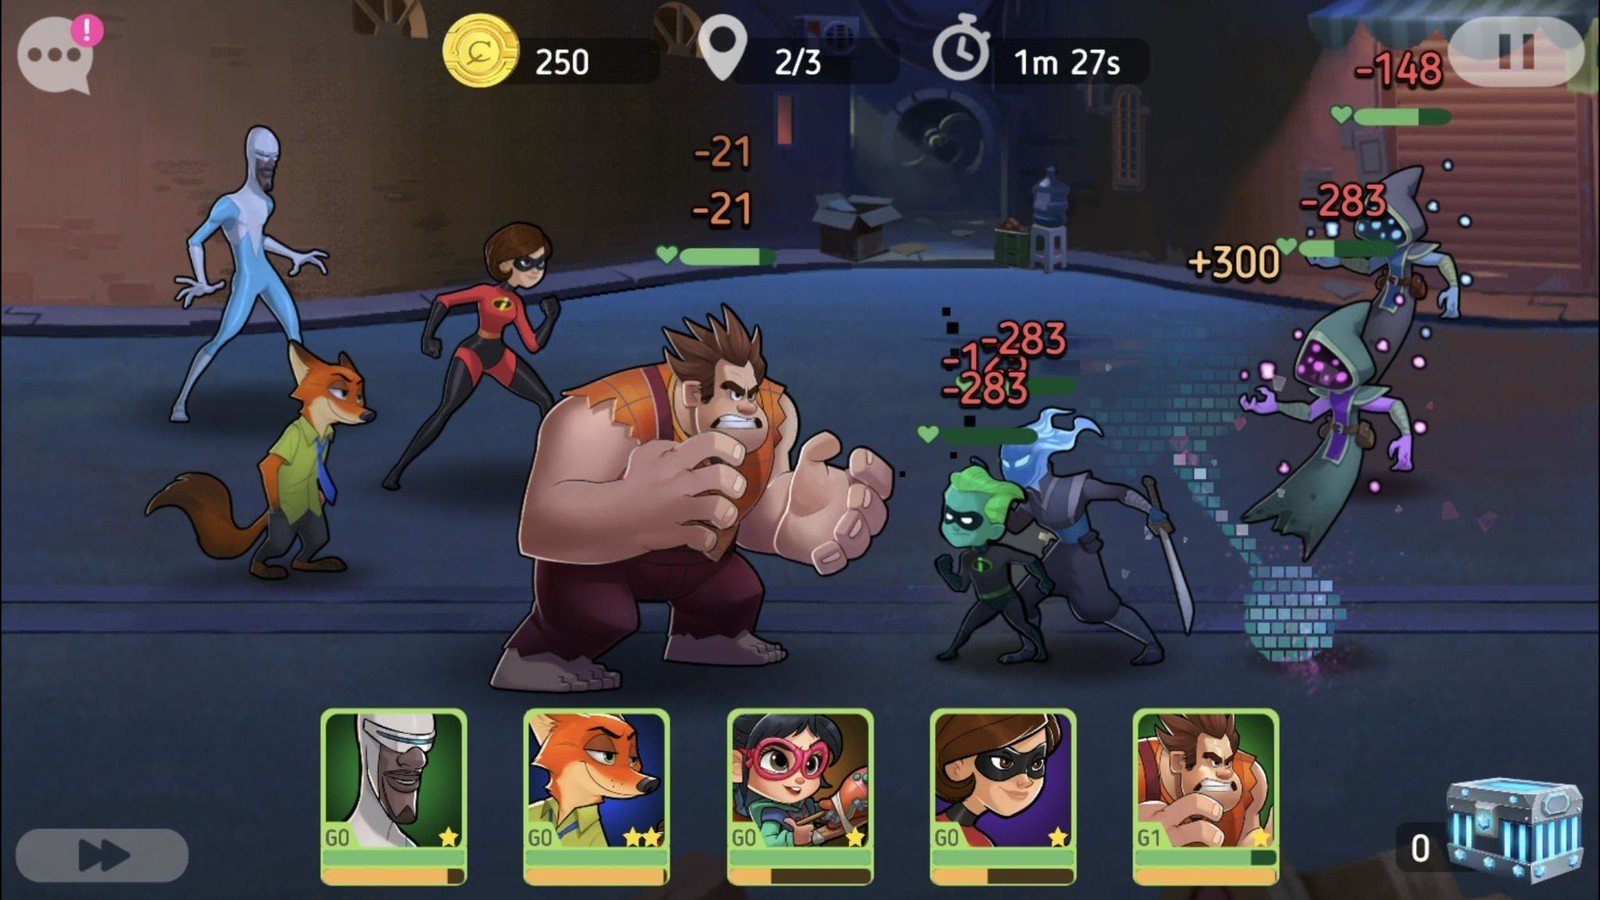 See How To Get Diamonds In Disney Heroes: Battle Mode